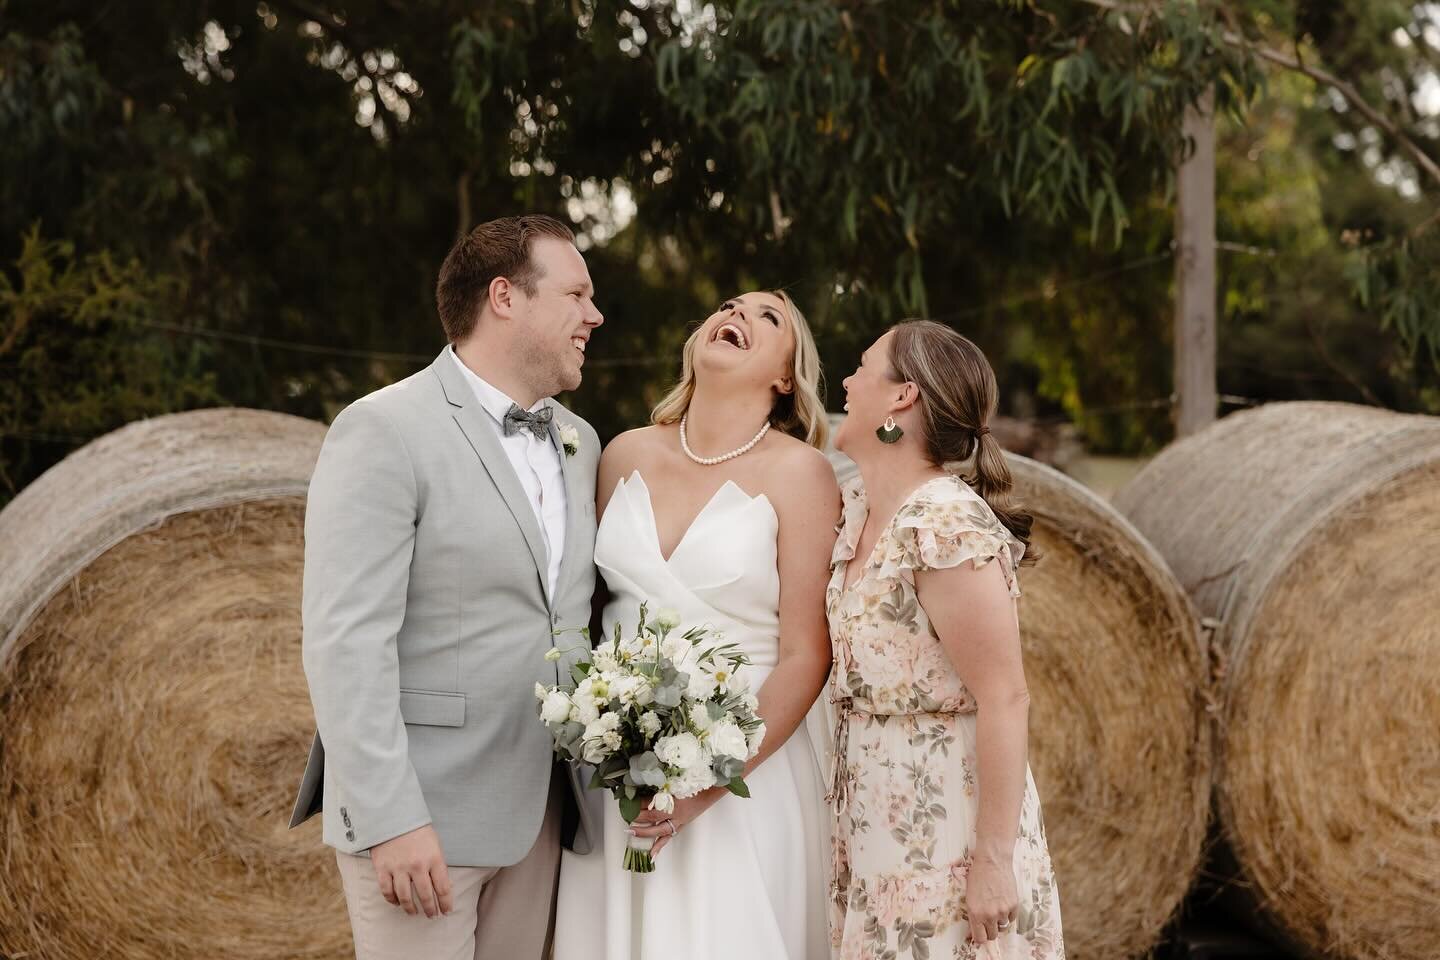 ~Some love ❤️ ~

Thankyou so so much for everything. It was absolutely perfect 🥰 here are a few shot Keoni popped in our sneak peaks! 

@keonijoyphotography
@erhn.trl 
@acaciaridgewinery 
@wearepaperhearts